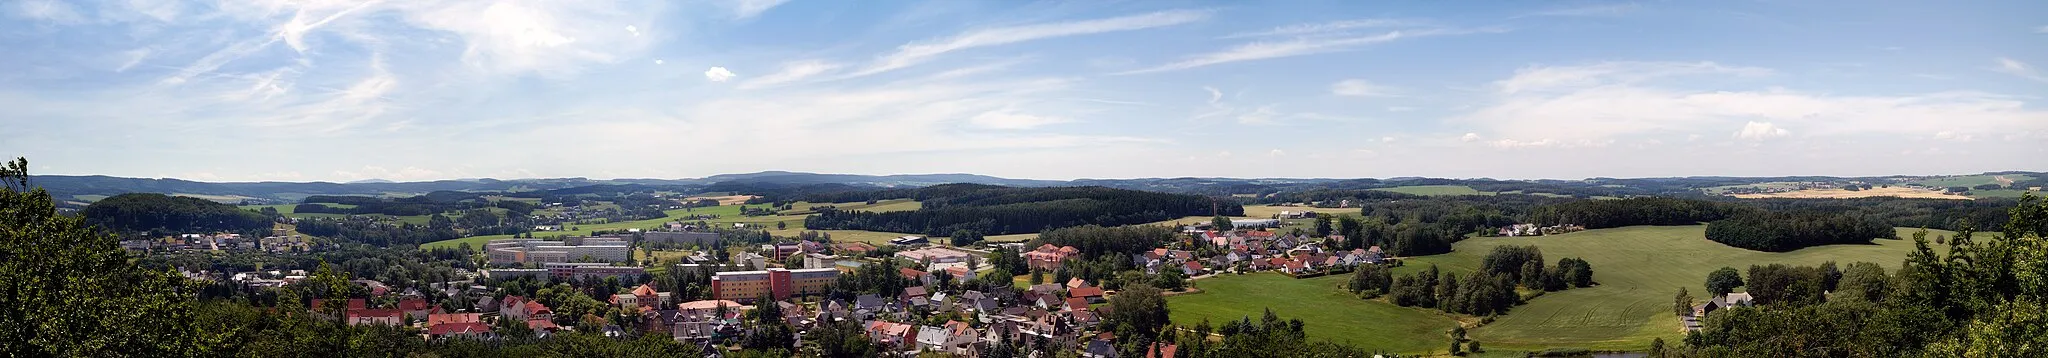 Photo showing: This image shows the town Kirchberg, Germany as seen from the Borberg. It is a five segment panoramic image.